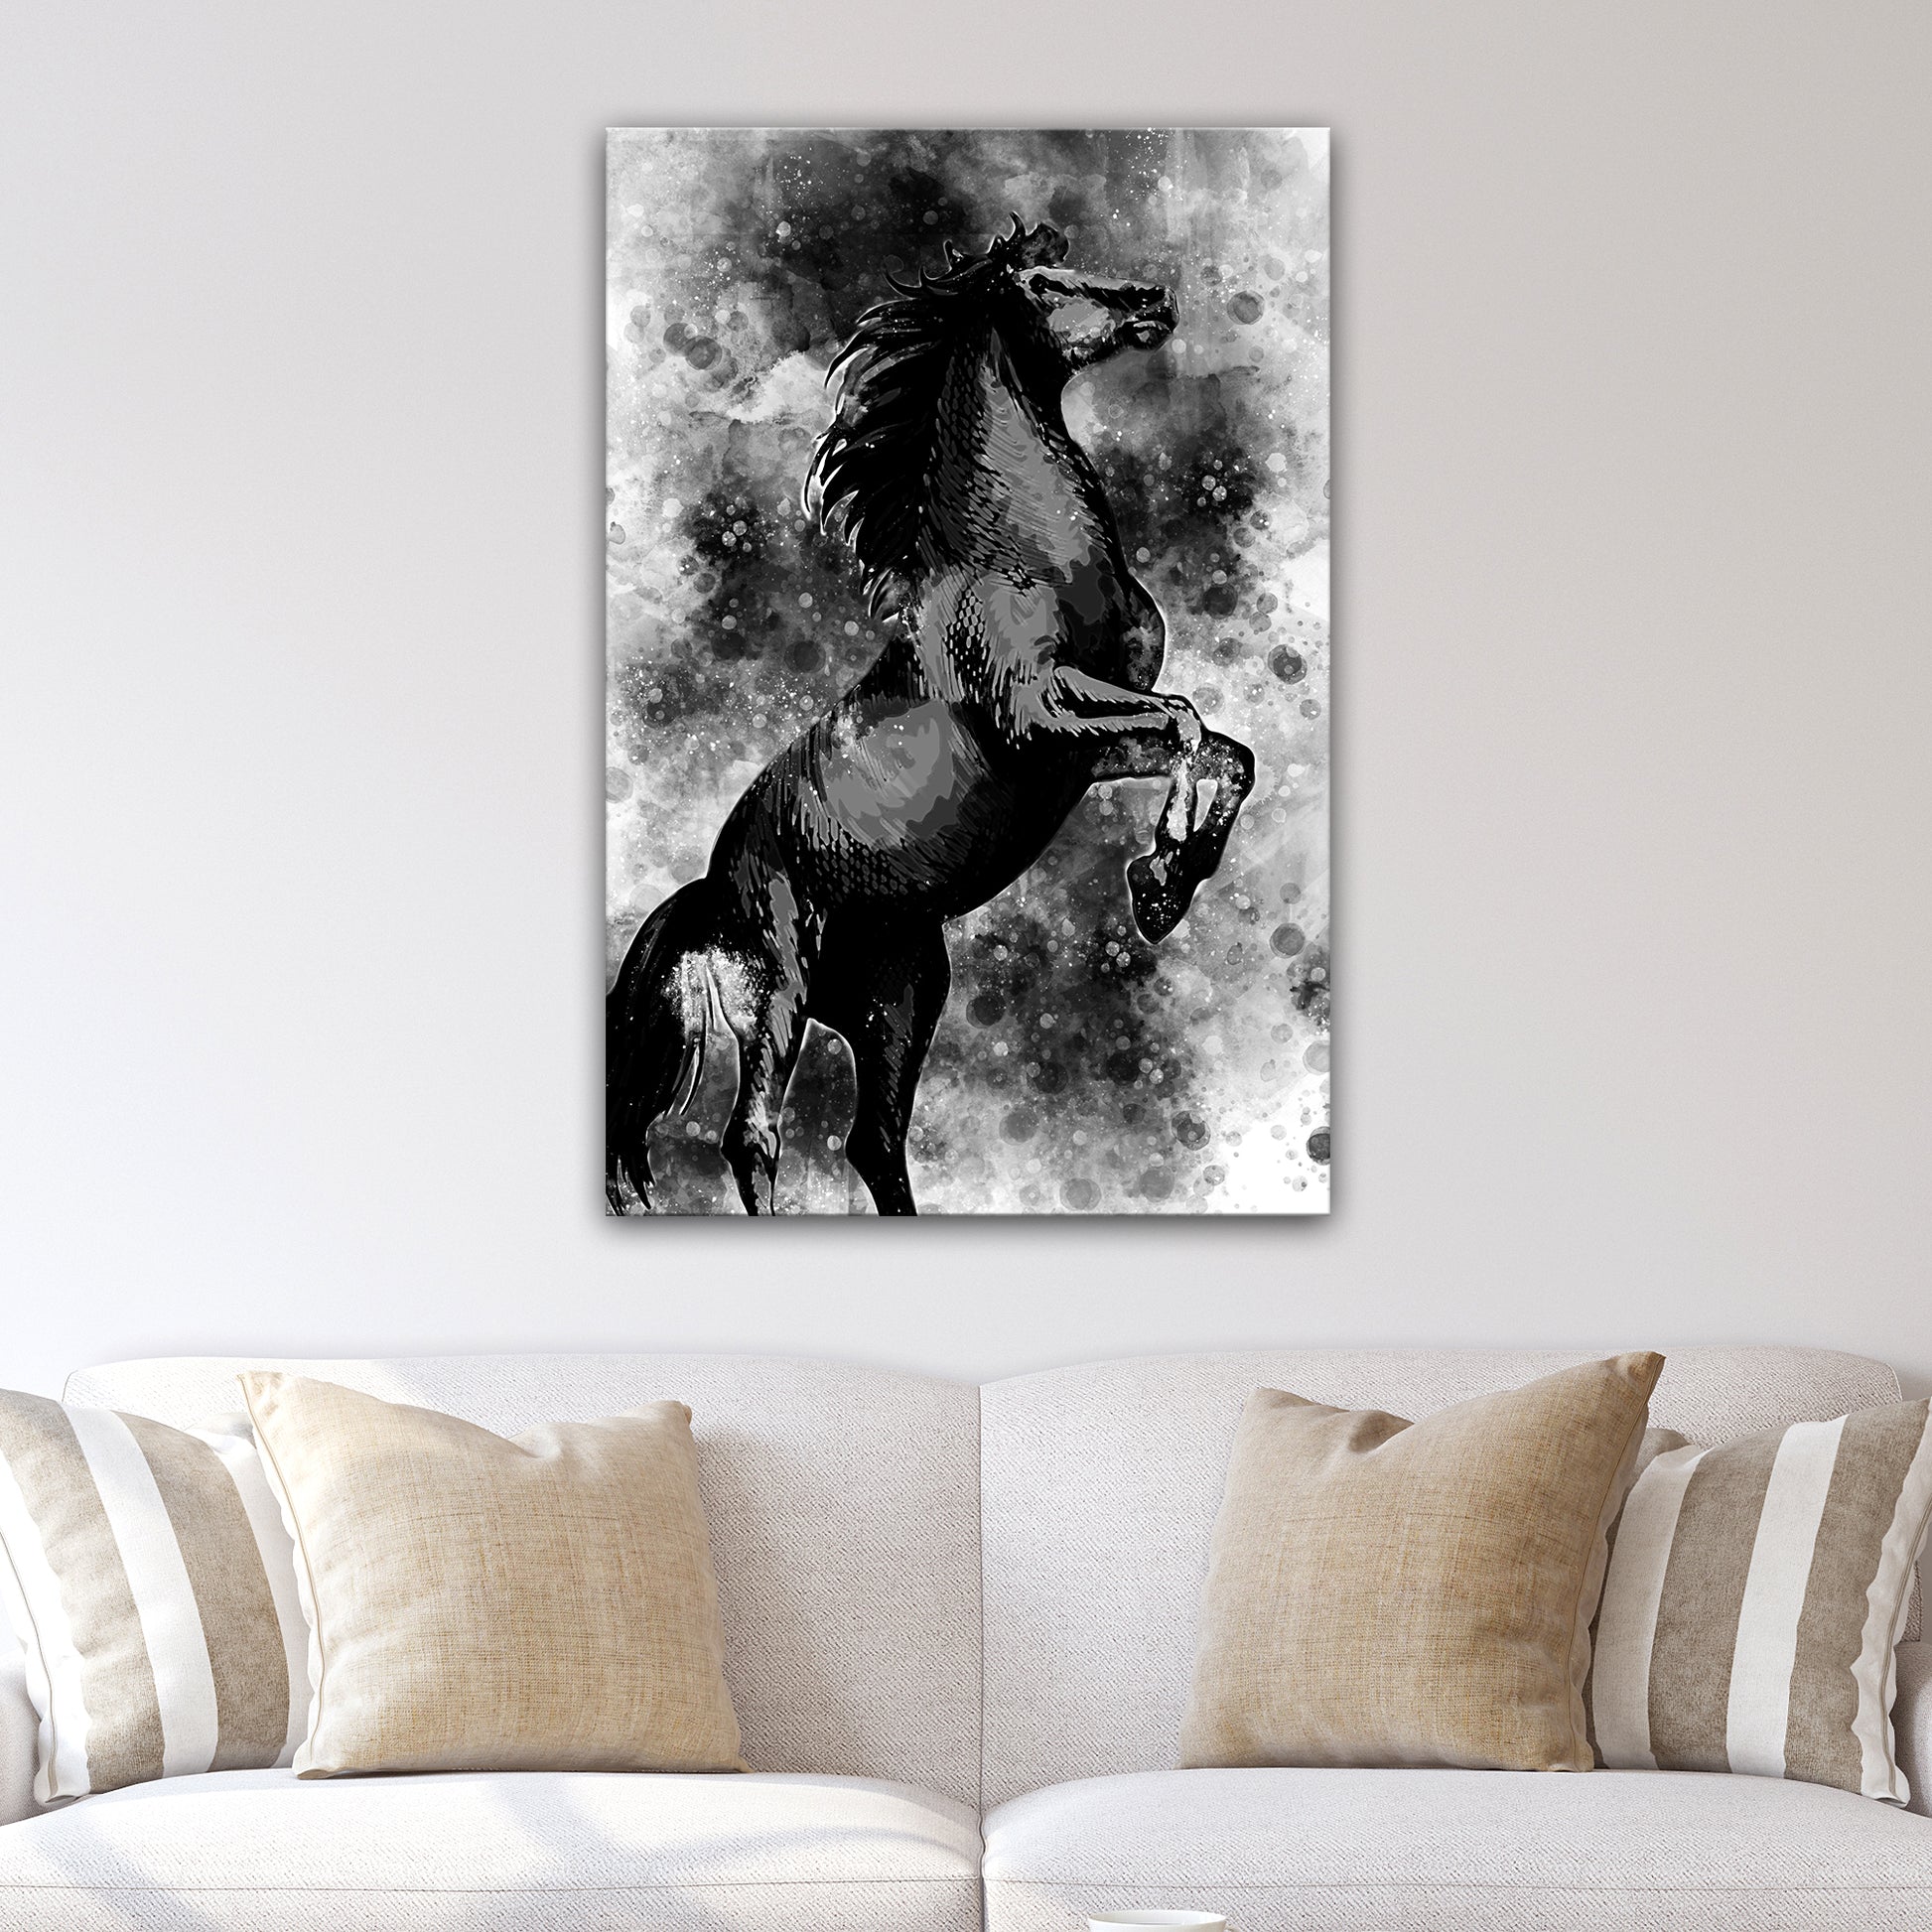 Whimsical Horse Style 1 - Image by Tailored Canvases